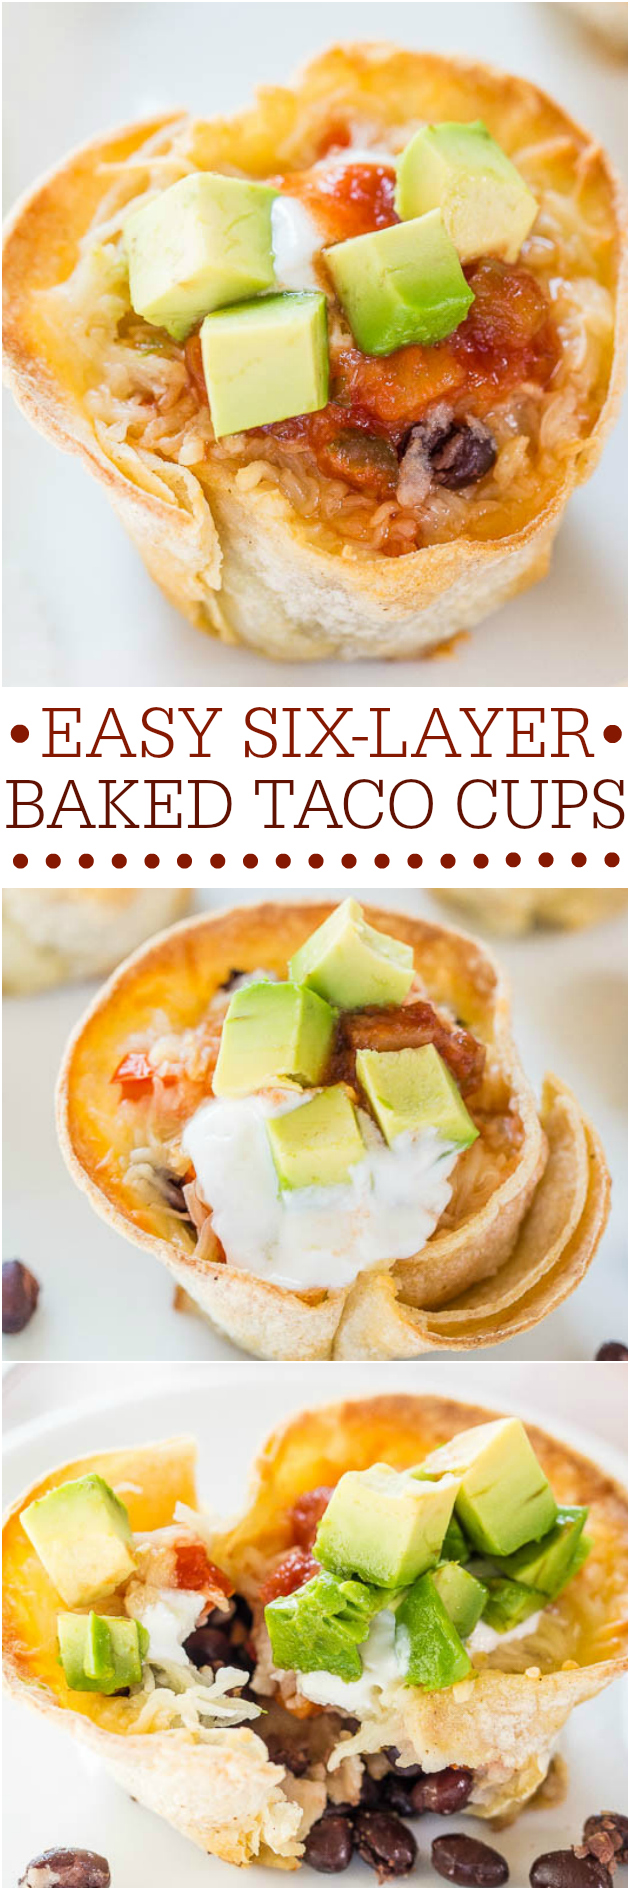 Easy Six-Layer Baked Taco Cups - Fast, easy, and accidentally healthy! Your favorite taco fixings in individually-portioned cups!! So fun!!!